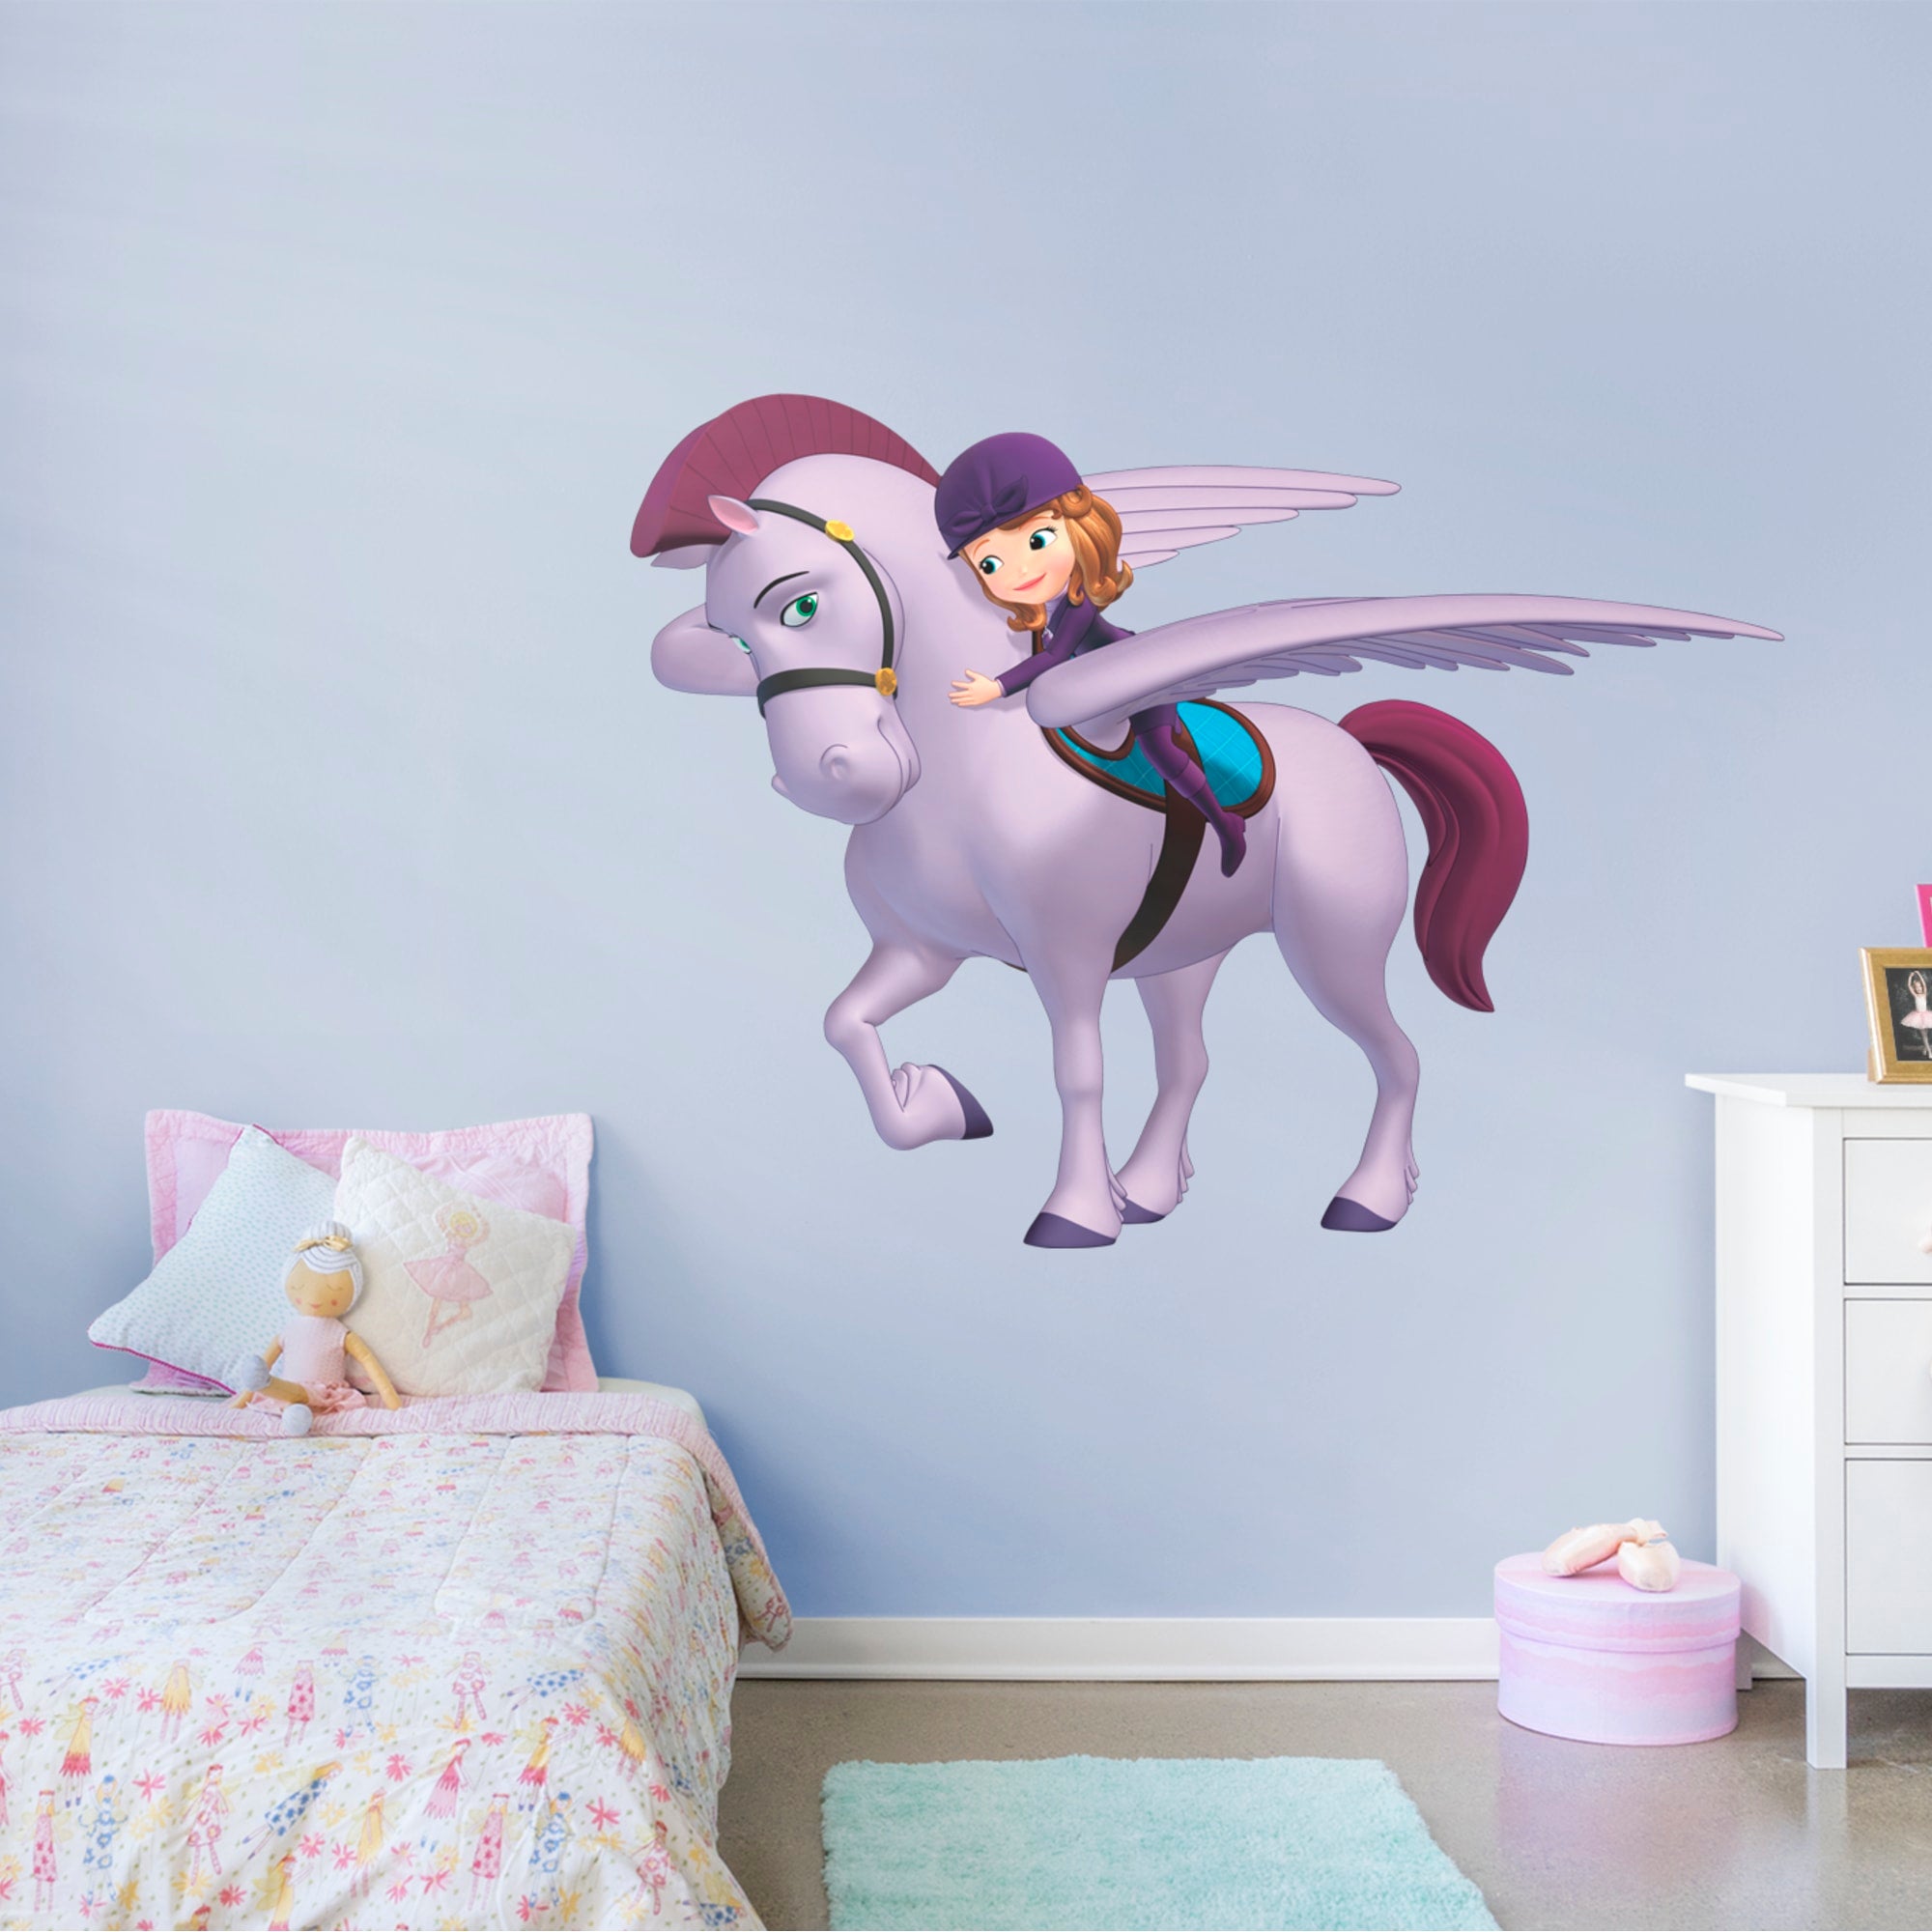 Sofia the First: Sophia & Minimus - Officially Licensed Disney Removable Wall Decal 72.0"W x 52.0"H by Fathead | Vinyl